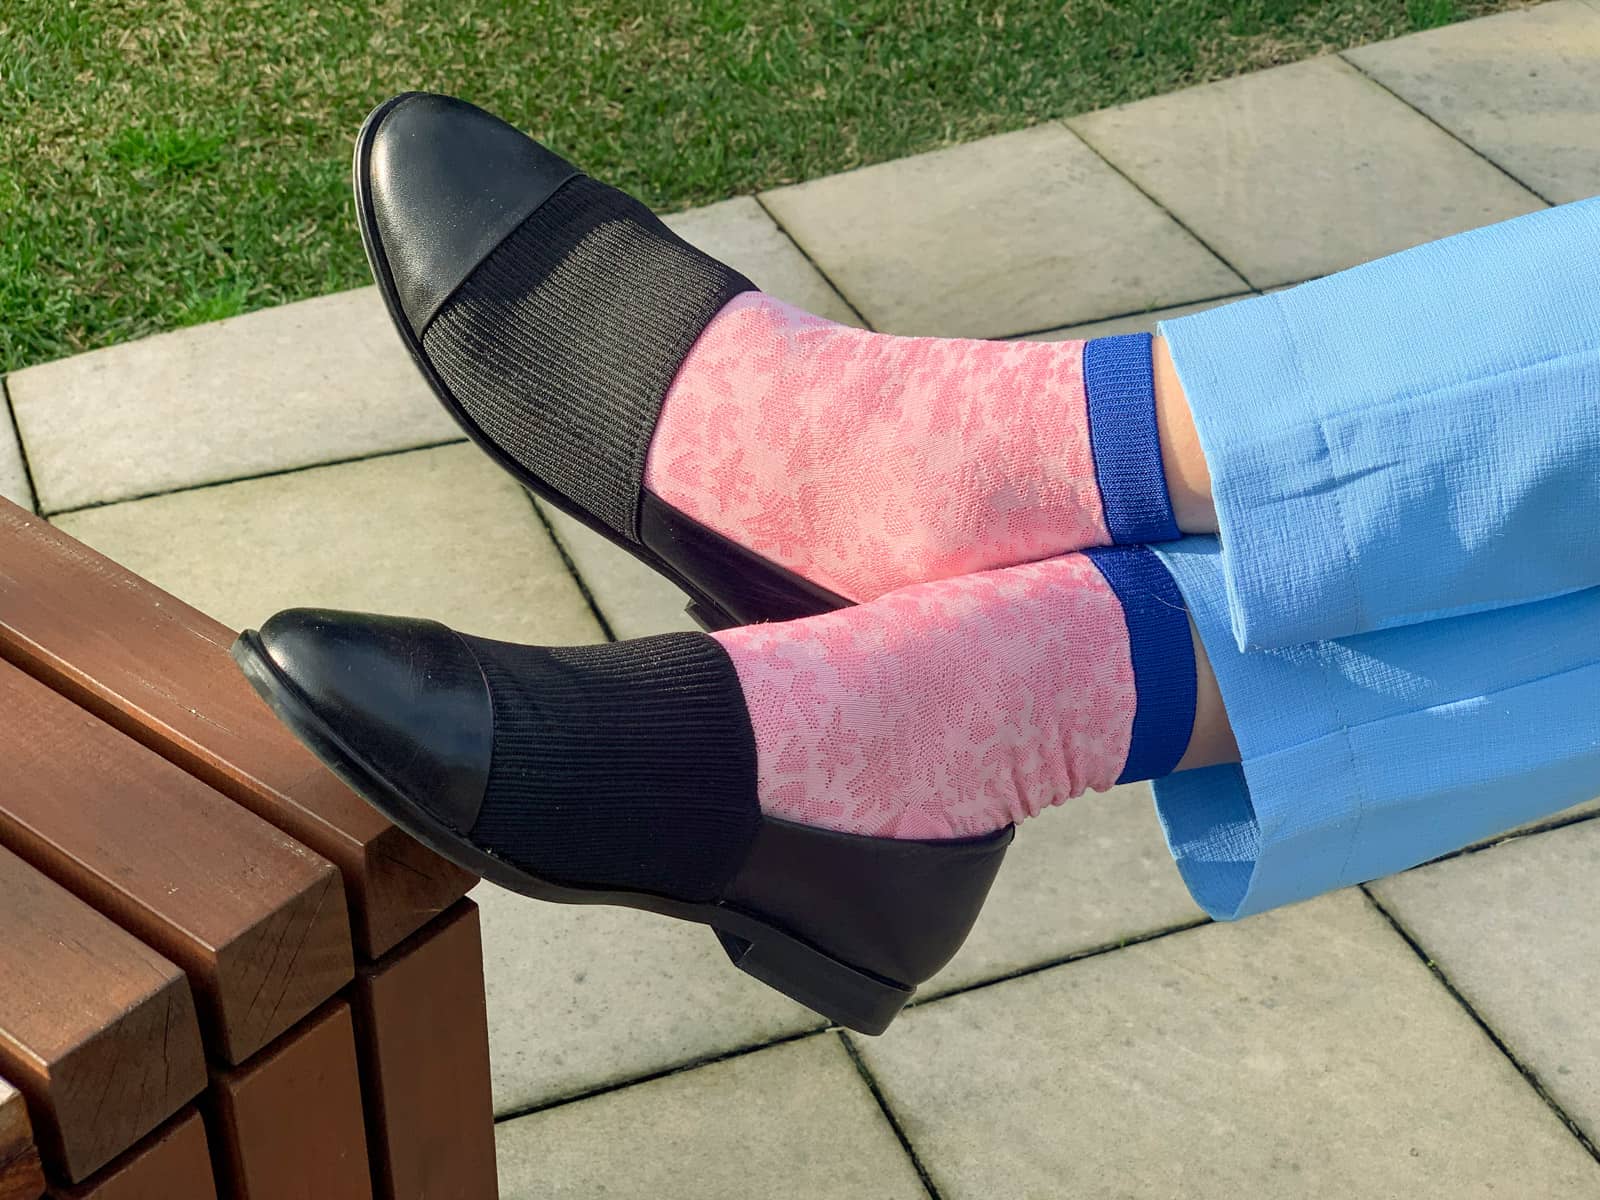 A close-up of a womanâ€™s feet wearing pink socks with a splatter texture, with blue top edges. She is wearing black loafers on her feet that have a knitted area covering the top part of the loafer